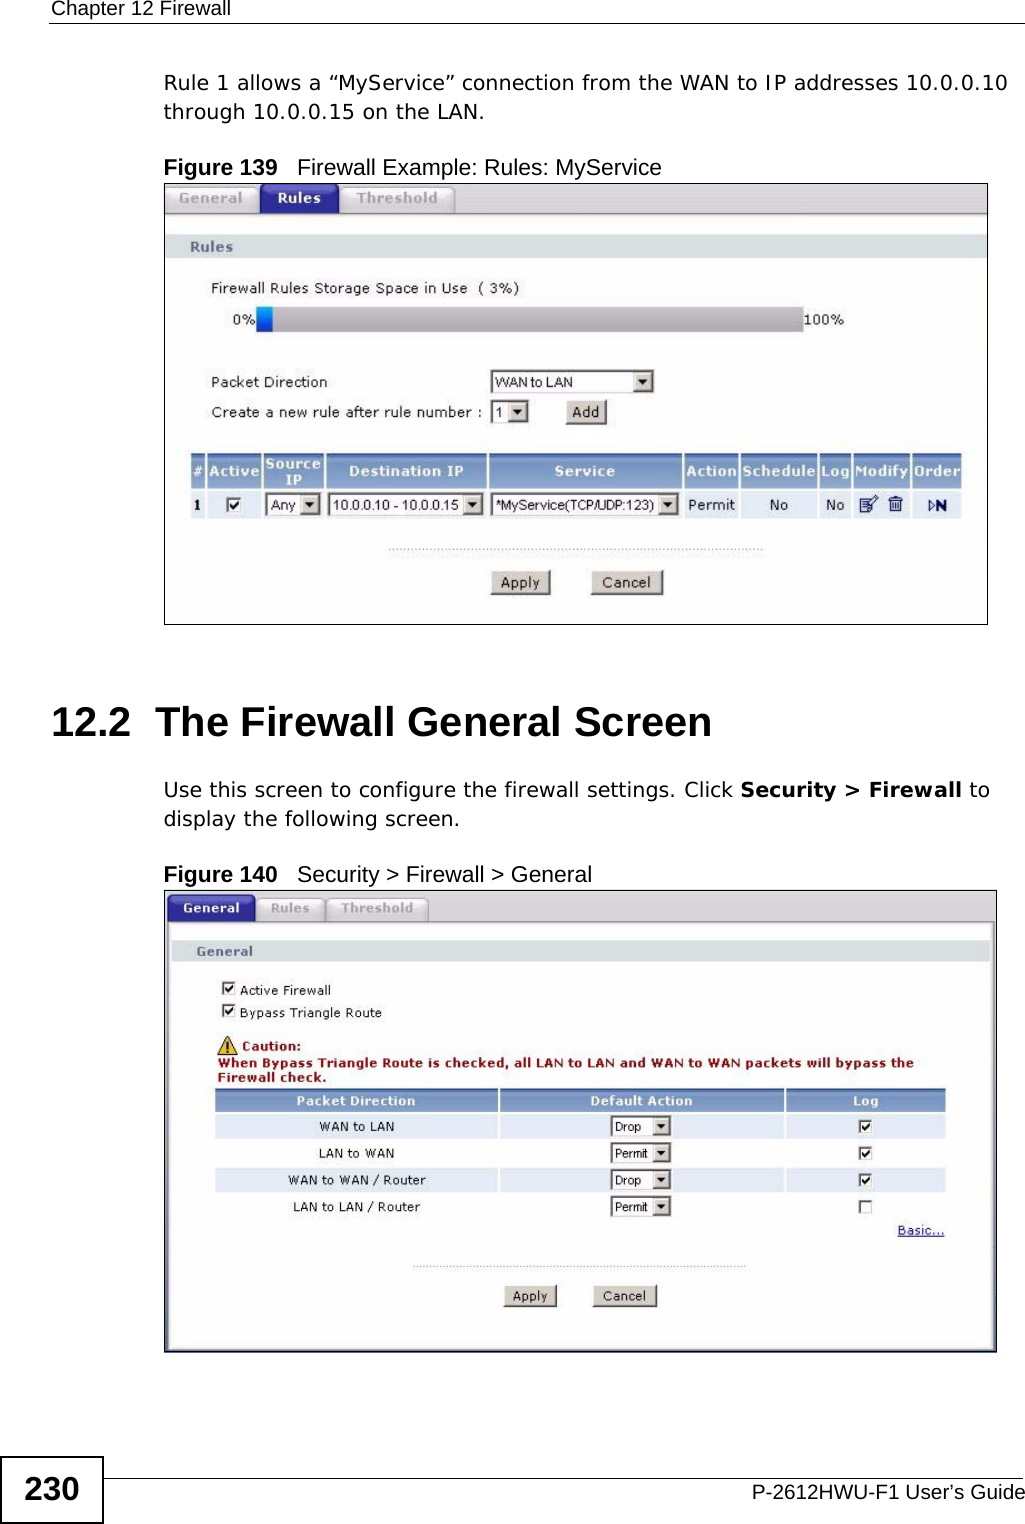 Chapter 12 FirewallP-2612HWU-F1 User’s Guide230Rule 1 allows a “MyService” connection from the WAN to IP addresses 10.0.0.10 through 10.0.0.15 on the LAN.Figure 139   Firewall Example: Rules: MyService 12.2  The Firewall General ScreenUse this screen to configure the firewall settings. Click Security &gt; Firewall to display the following screen.Figure 140   Security &gt; Firewall &gt; General